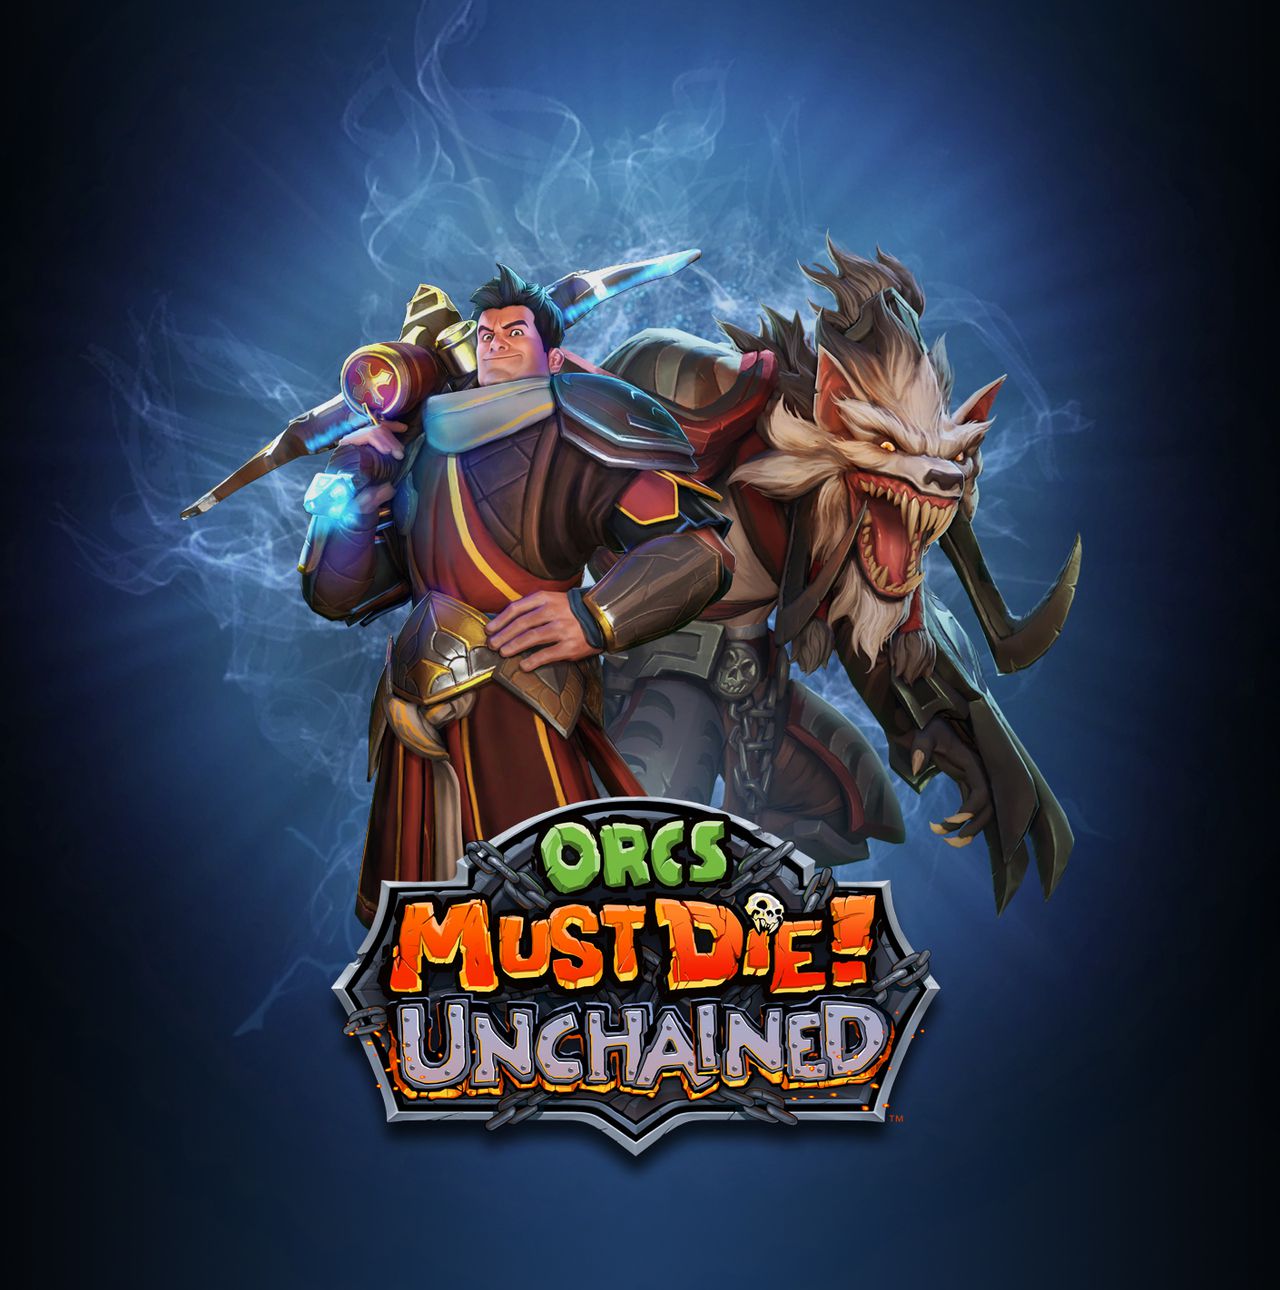 Orcs Must Die ! Unchained (2017)  - Jeu vidéo streaming VF gratuit complet